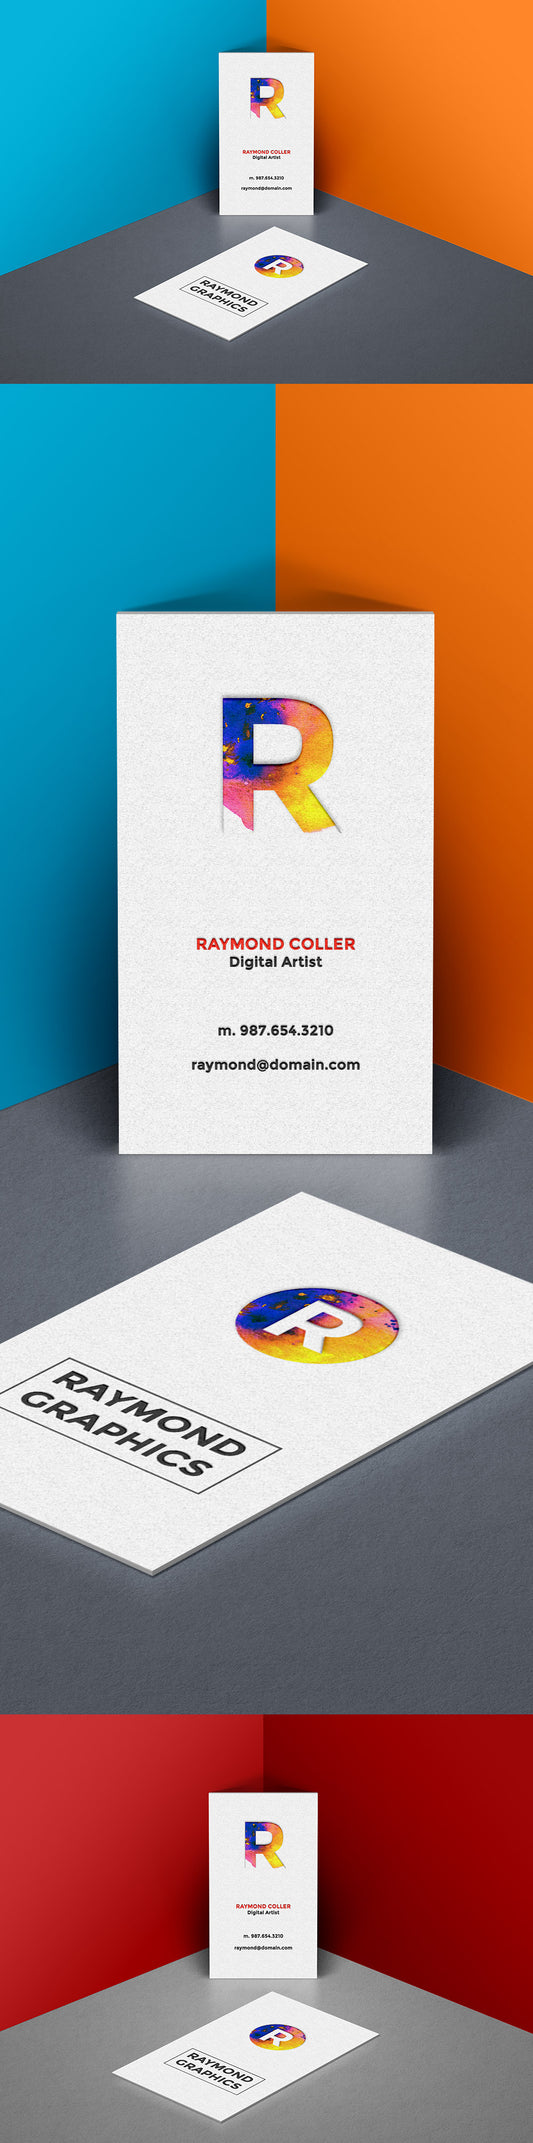 Free Business Card Mockup in Isometric Corner PSD Template